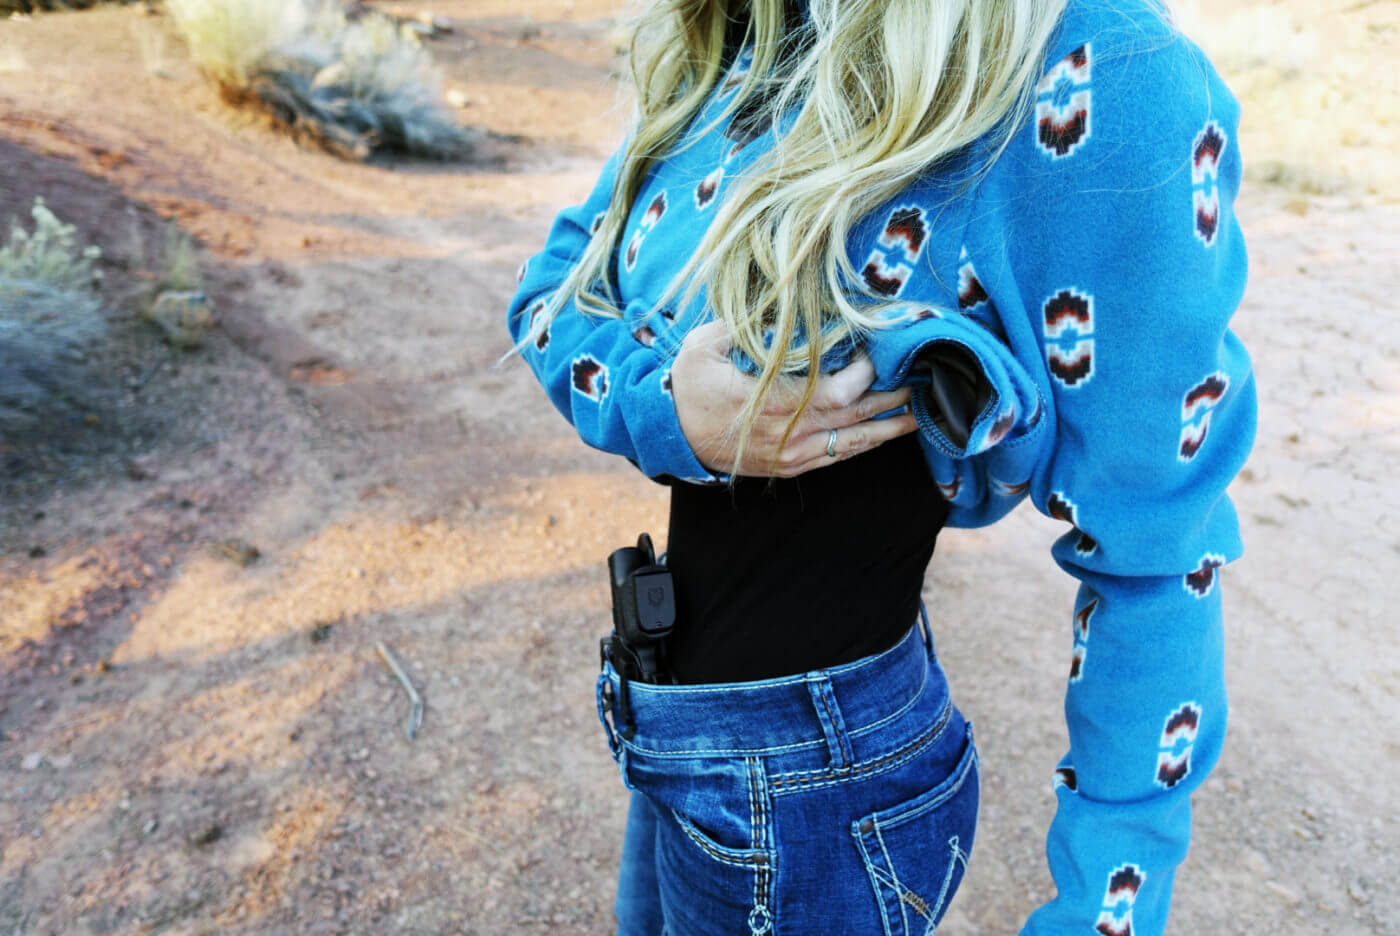 Gear Review: CrossBreed IWB Women's Appendix Carry Holster - The